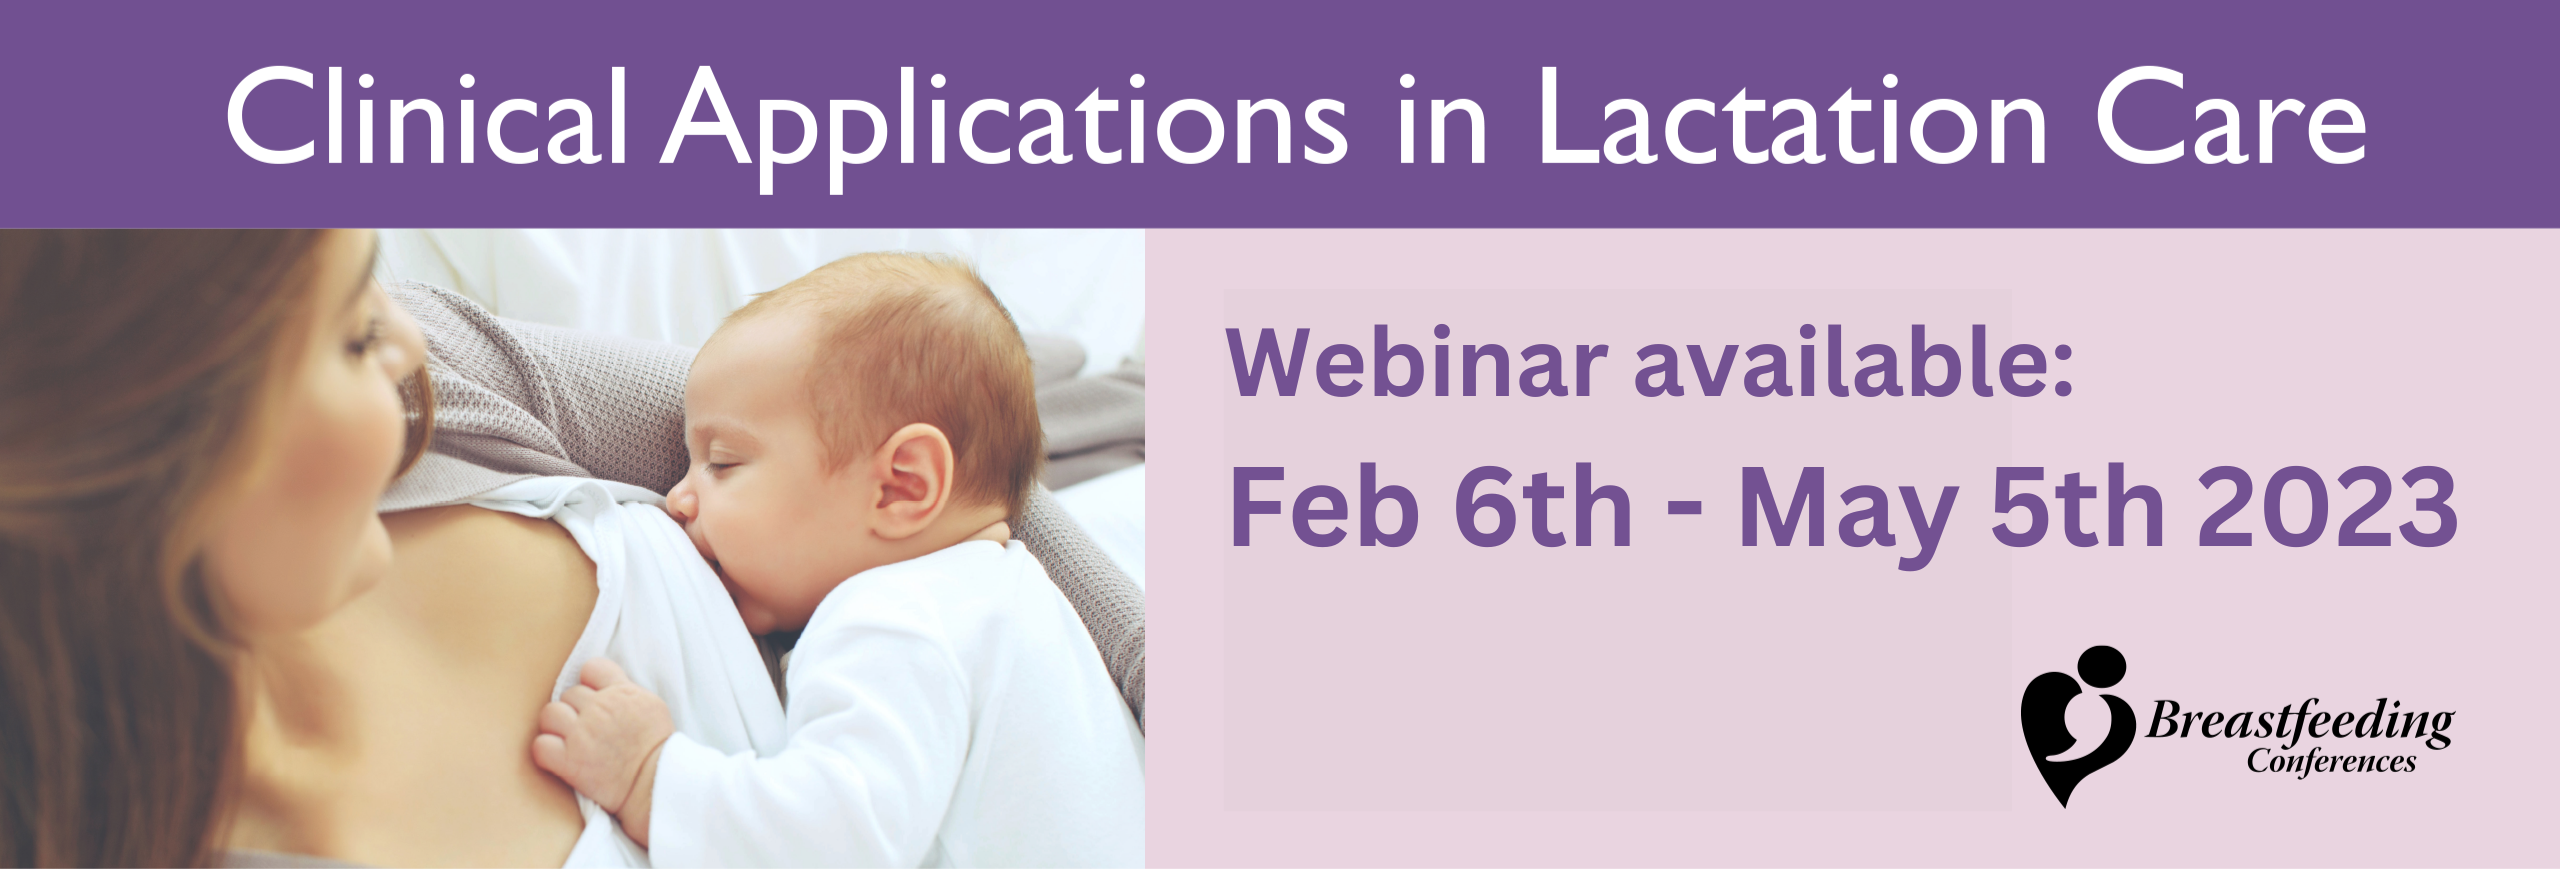 Clinical Applications in Lactation Care - Now Online!